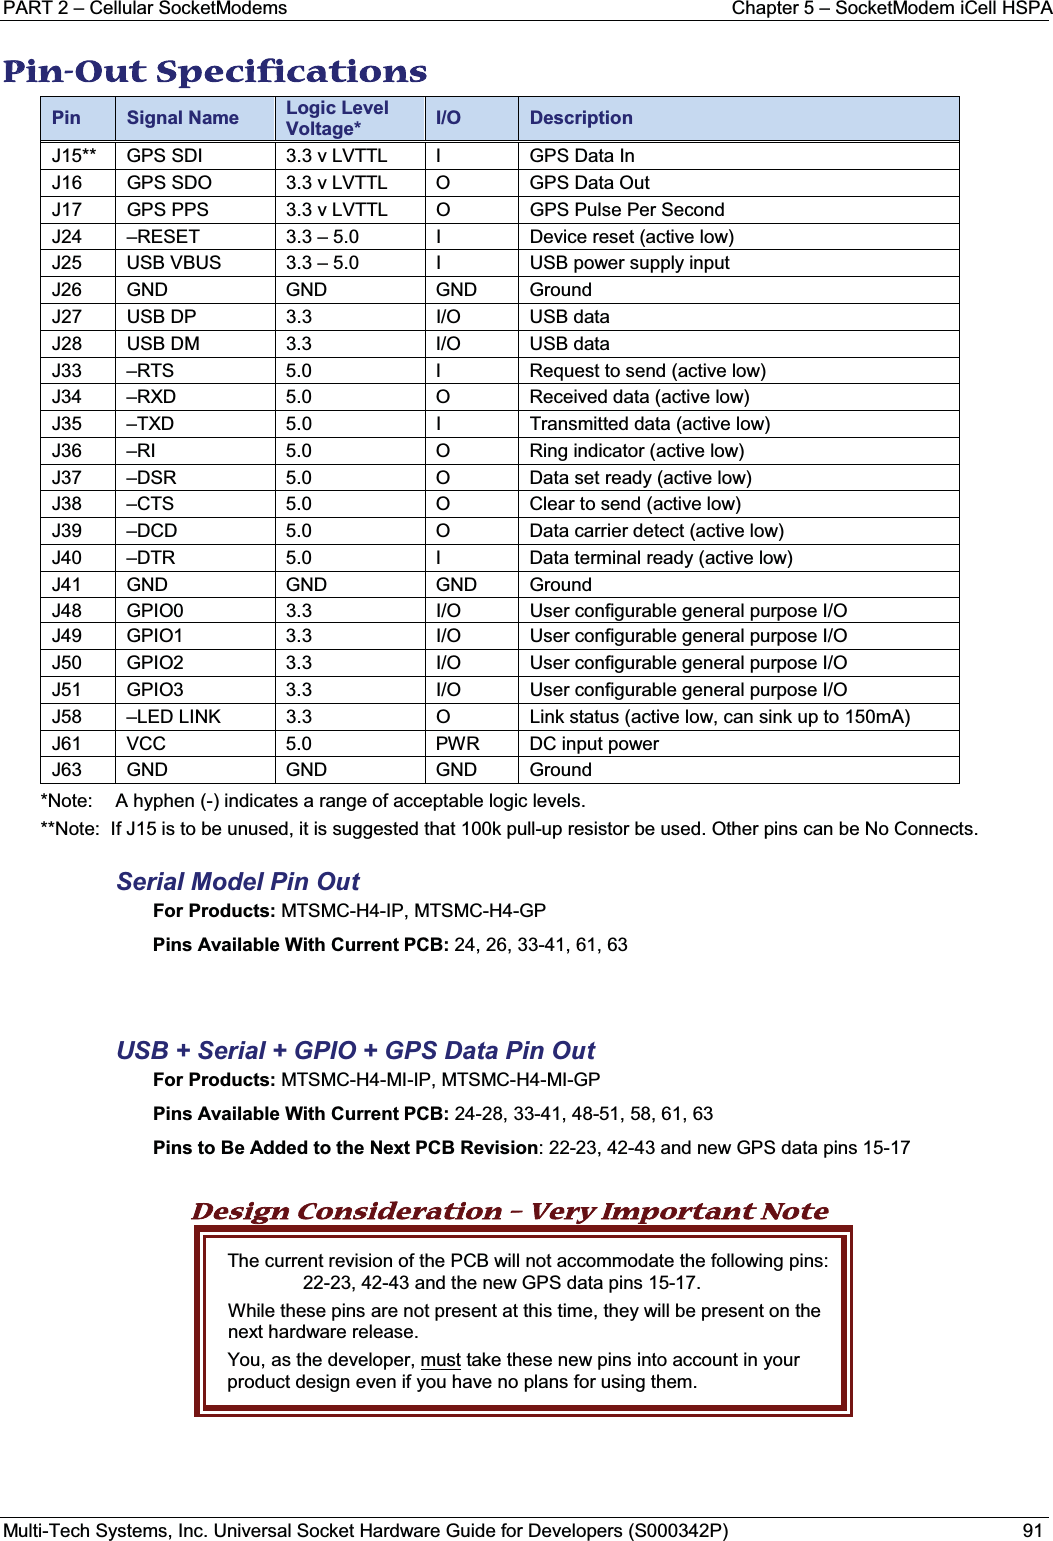 PART 2 – Cellular SocketModems Chapter 5 – SocketModem iCell HSPAMulti-Tech Systems, Inc. Universal Socket Hardware Guide for Developers (S000342P) 91PPin-Out Specifications  Pin Signal Name Logic Level Voltage* I/O DescriptionJ15** GPS SDI 3.3 v LVTTL I GPS Data InJ16 GPS SDO 3.3 v LVTTL O GPS Data OutJ17 GPS PPS 3.3 v LVTTL O GPS Pulse Per SecondJ24 –RESET 3.3 – 5.0 I Device reset (active low)J25 USB VBUS 3.3 – 5.0 I USB power supply inputJ26 GND GND GND GroundJ27 USB DP 3.3 I/O USB dataJ28 USB DM 3.3 I/O USB dataJ33 –RTS 5.0 I Request to send (active low)J34 –RXD 5.0 O Received data (active low)J35 –TXD 5.0 I Transmitted data (active low)J36 –RI 5.0 O Ring indicator (active low)J37 –DSR 5.0 O Data set ready (active low)J38 –CTS 5.0 O Clear to send (active low)J39 –DCD 5.0 O Data carrier detect (active low)J40 –DTR 5.0 I Data terminal ready (active low)J41 GND GND GND GroundJ48 GPIO0 3.3 I/O User configurable general purpose I/OJ49 GPIO1 3.3 I/O User configurable general purpose I/OJ50 GPIO2 3.3 I/O User configurable general purpose I/OJ51 GPIO3 3.3 I/O User configurable general purpose I/OJ58 –LED LINK 3.3 O Link status (active low, can sink up to 150mA)J61 VCC 5.0 PWR DC input powerJ63 GND GND GND Ground*Note: A hyphen (-) indicates a range of acceptable logic levels.**Note:  If J15 is to be unused, it is suggested that 100k pull-up resistor be used. Other pins can be No Connects.Serial Model Pin OutFor Products: MTSMC-H4-IP, MTSMC-H4-GPPins Available With Current PCB: 24, 26, 33-41, 61, 63USB + Serial + GPIO + GPS Data Pin OutFor Products: MTSMC-H4-MI-IP, MTSMC-H4-MI-GPPins Available With Current PCB: 24-28, 33-41, 48-51, 58, 61, 63Pins to Be Added to the Next PCB Revision: 22-23, 42-43 and new GPS data pins 15-17Design Consideration – Very Important Note The current revision of the PCB will not accommodate the following pins: 22-23, 42-43 and the new GPS data pins 15-17. While these pins are not present at this time, they will be present on the next hardware release. You, as the developer, must take these new pins into account in your product design even if you have no plans for using them.